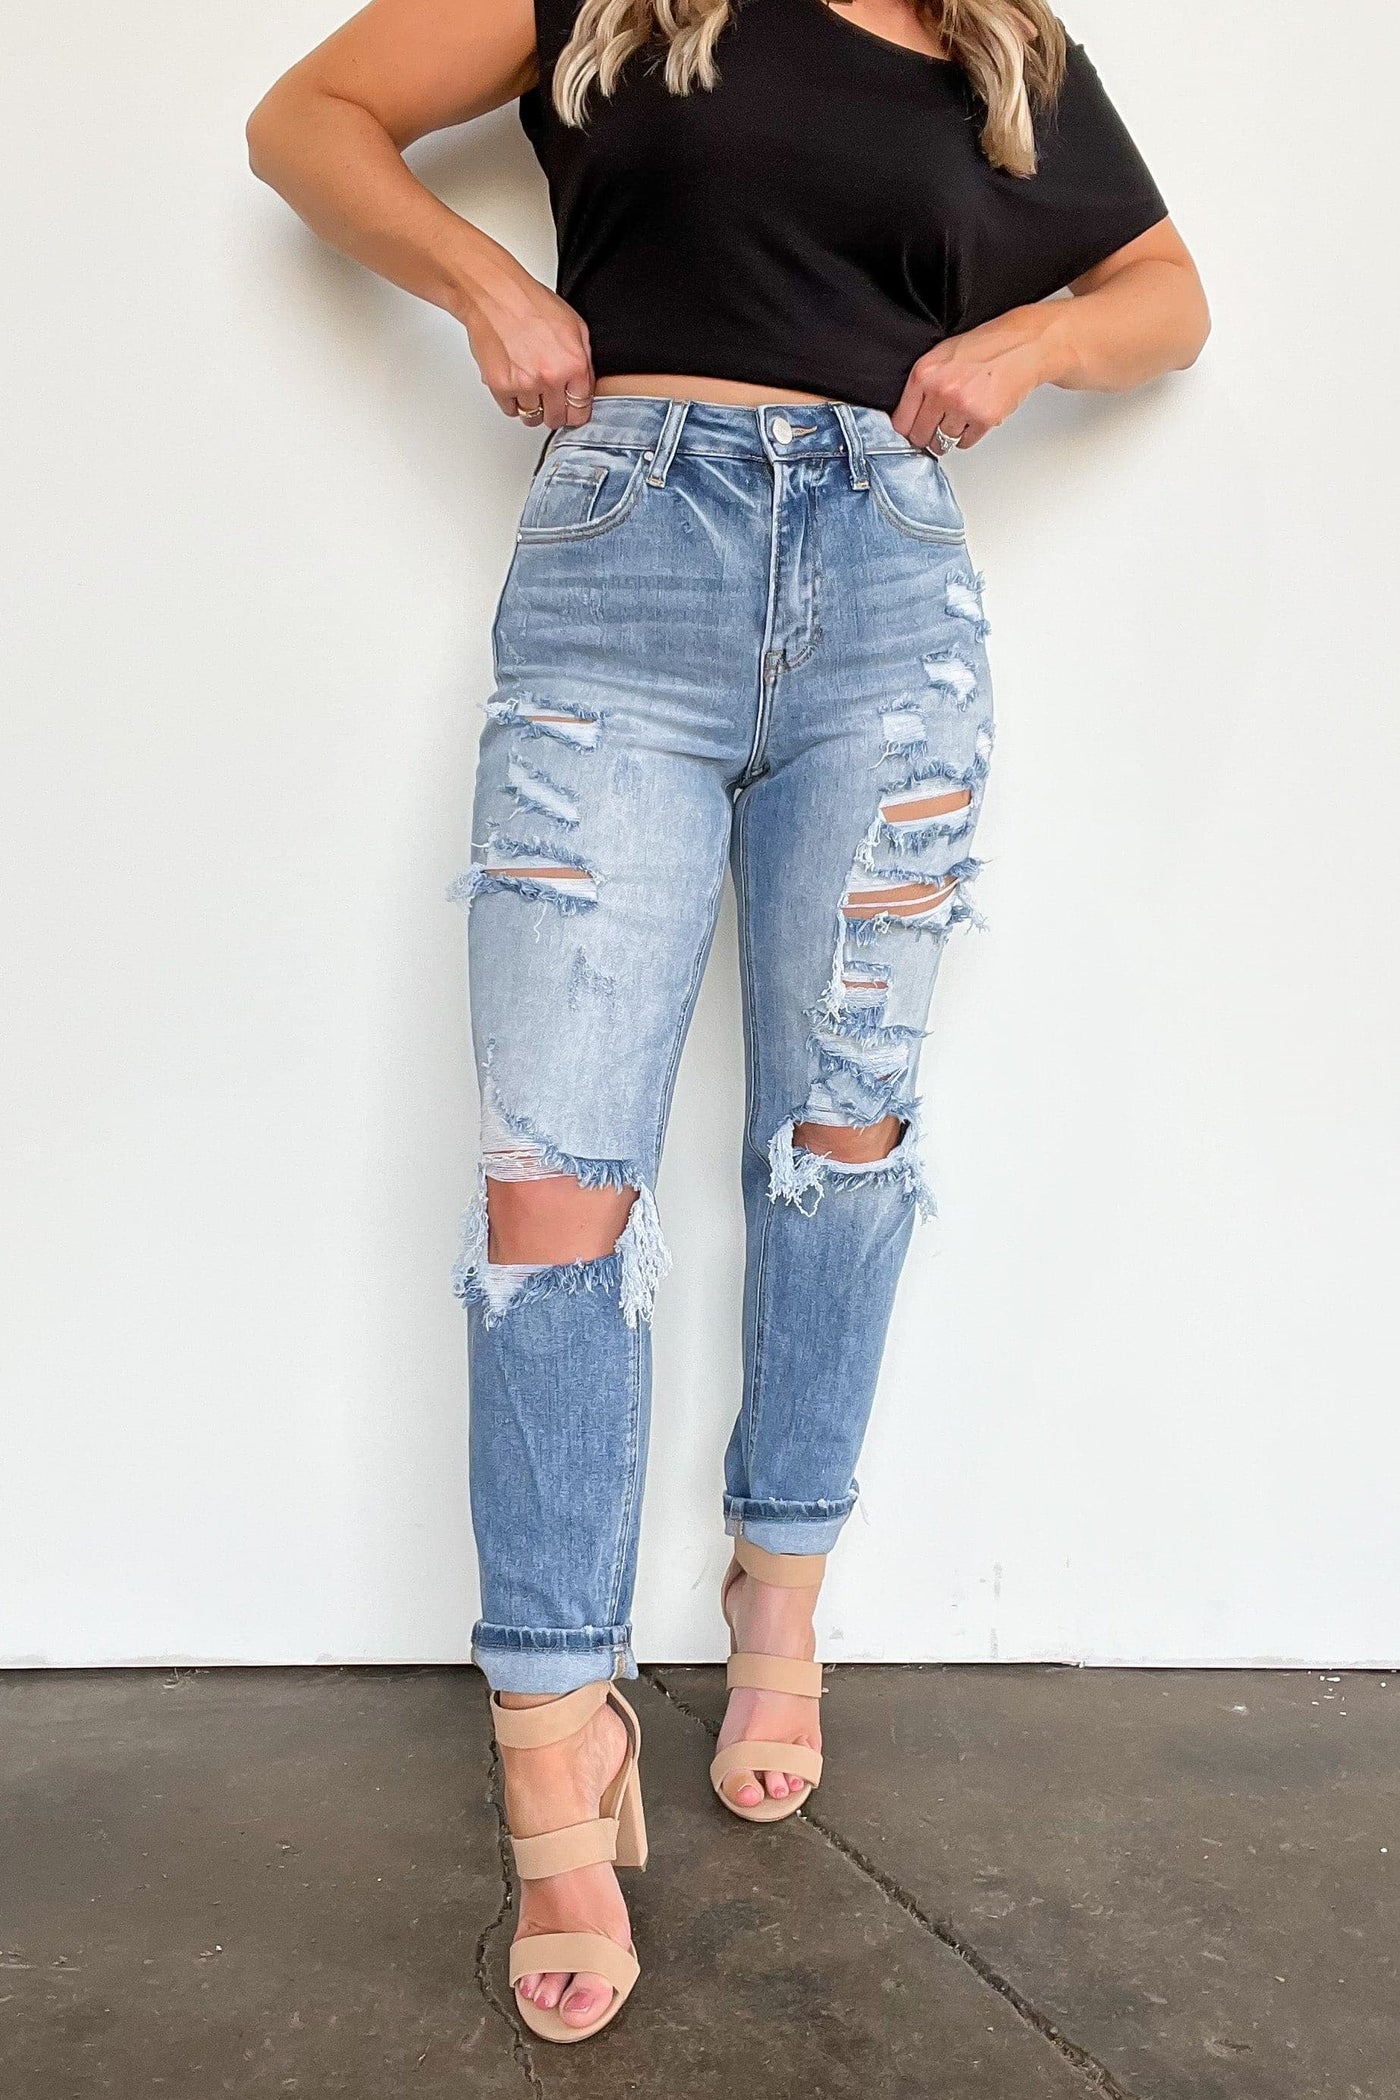 Medium Wash / 25/1 Altomare High Rise Distressed Girlfriend Jeans - BACK IN STOCK - Madison and Mallory